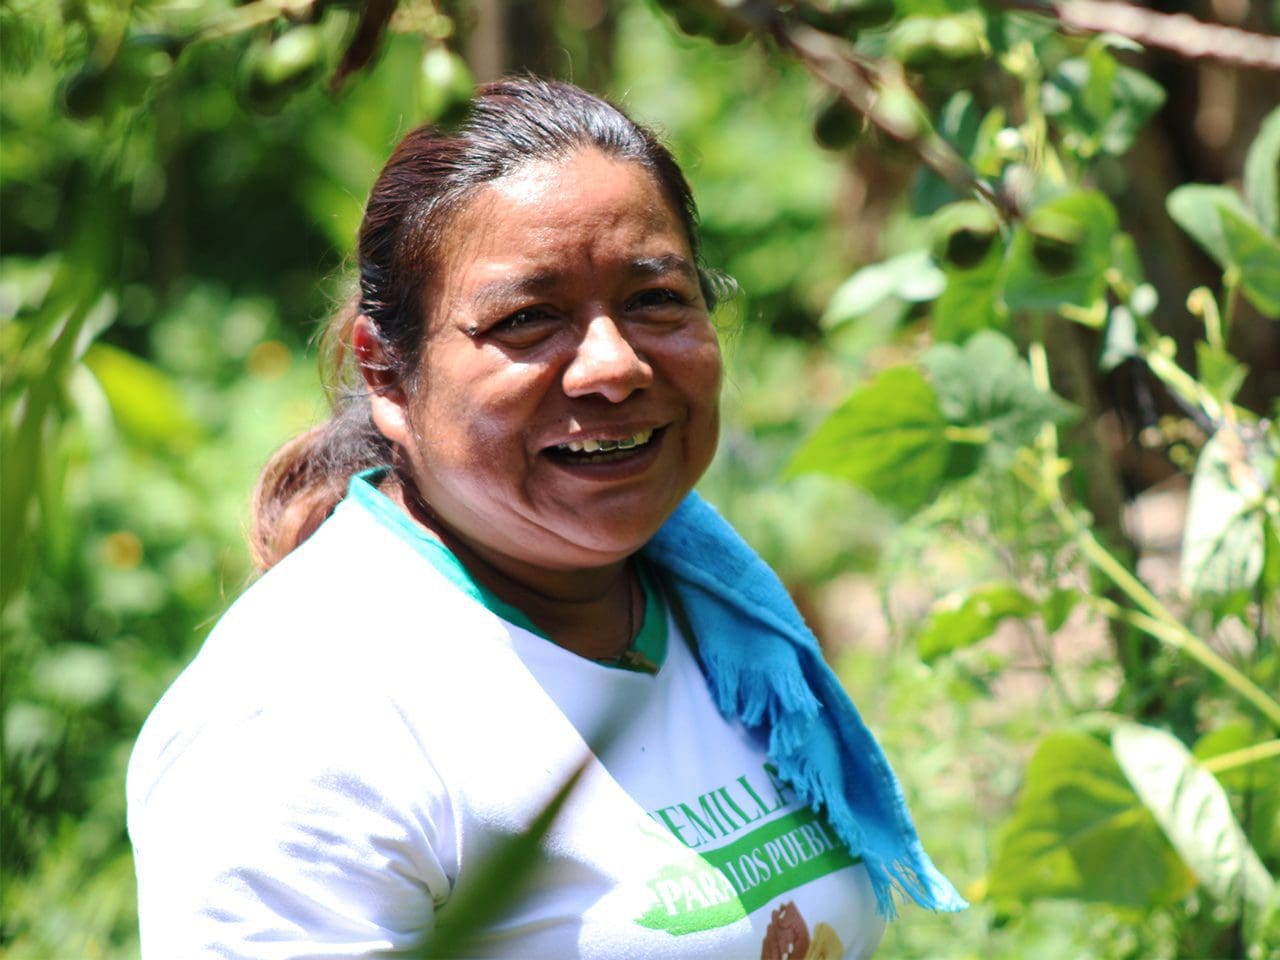 Ana Martínez's passion for organic gardening has led her to train others in her community